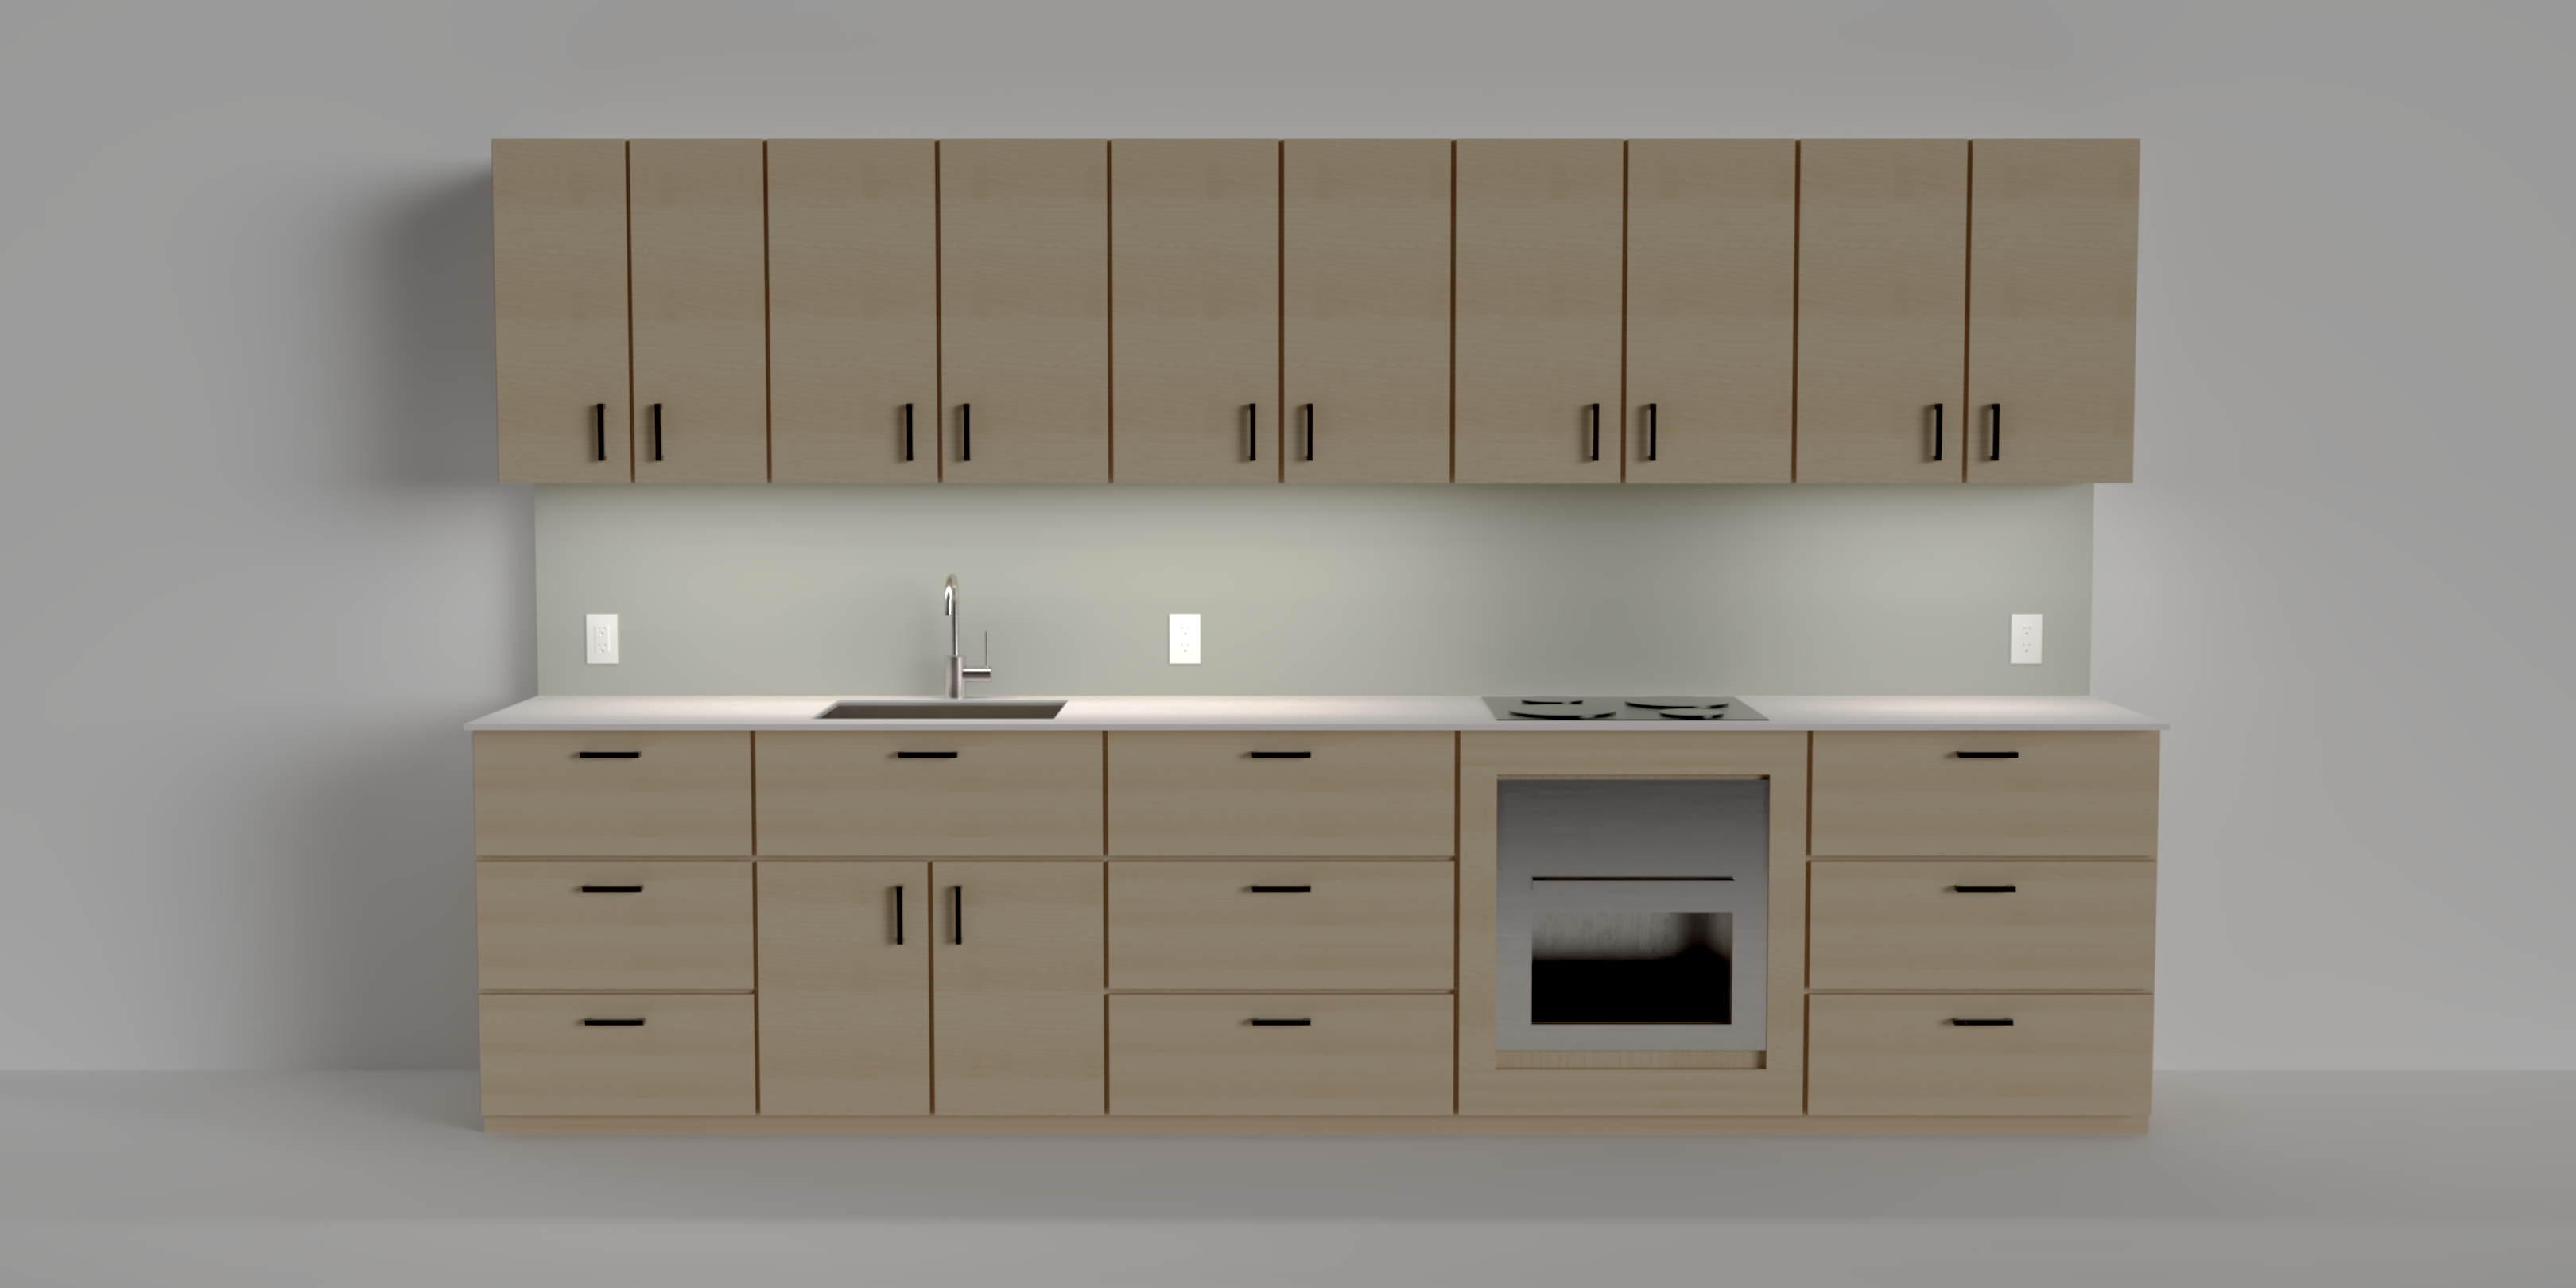 Quick kitchen retrofit assembly - kit of parts - with sink, electric cooktop , and oven in light finsih with undercabinet lighting; show against white background - photo